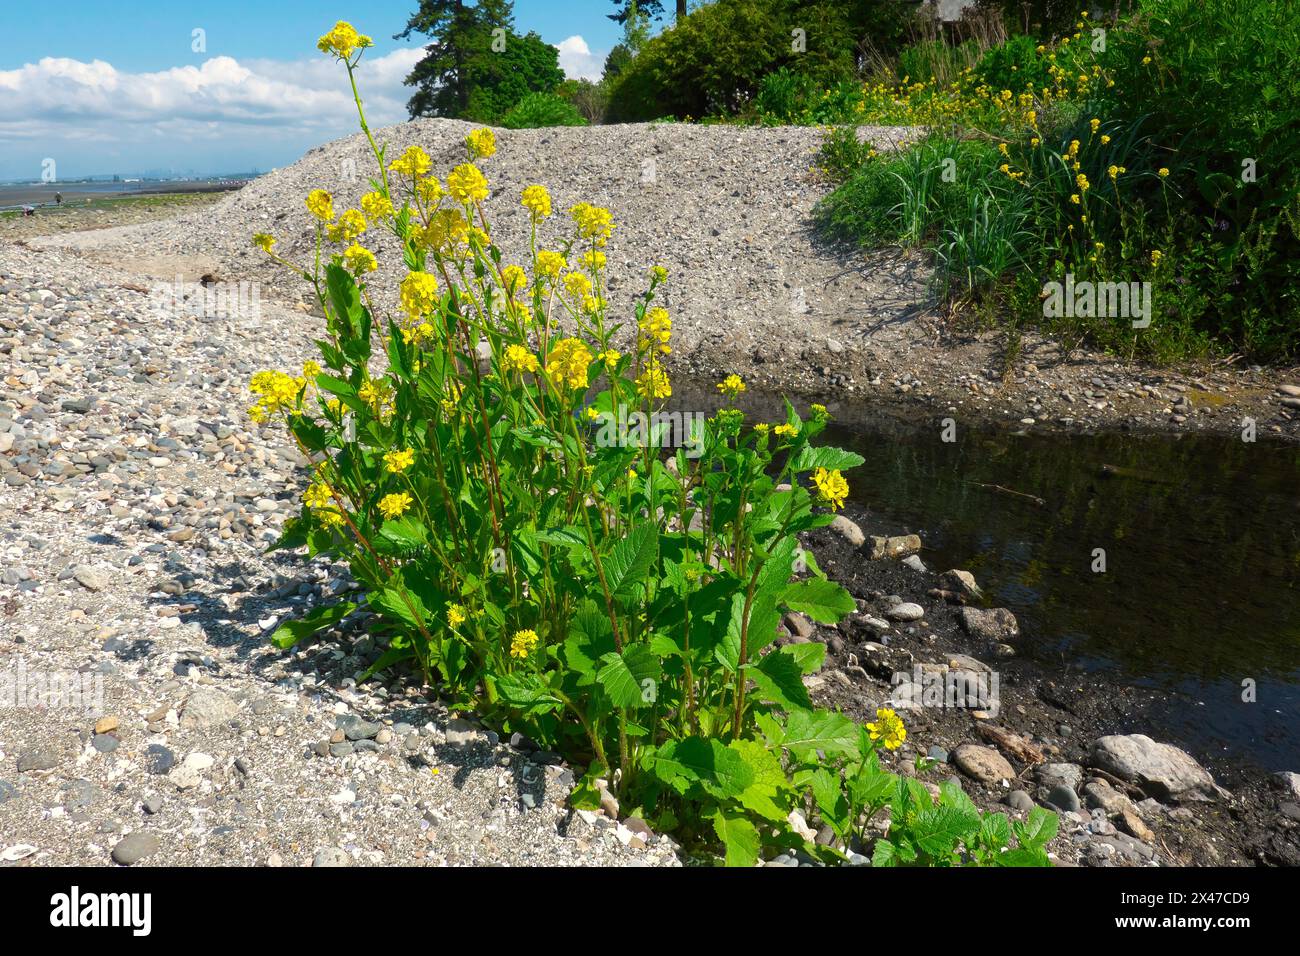 Charlock Mustard, Wild Mustard or Field Mustard (Sinapis arvensis) - growing by the oceanside at Crescent Beach, B. C., Canada. Stock Photo